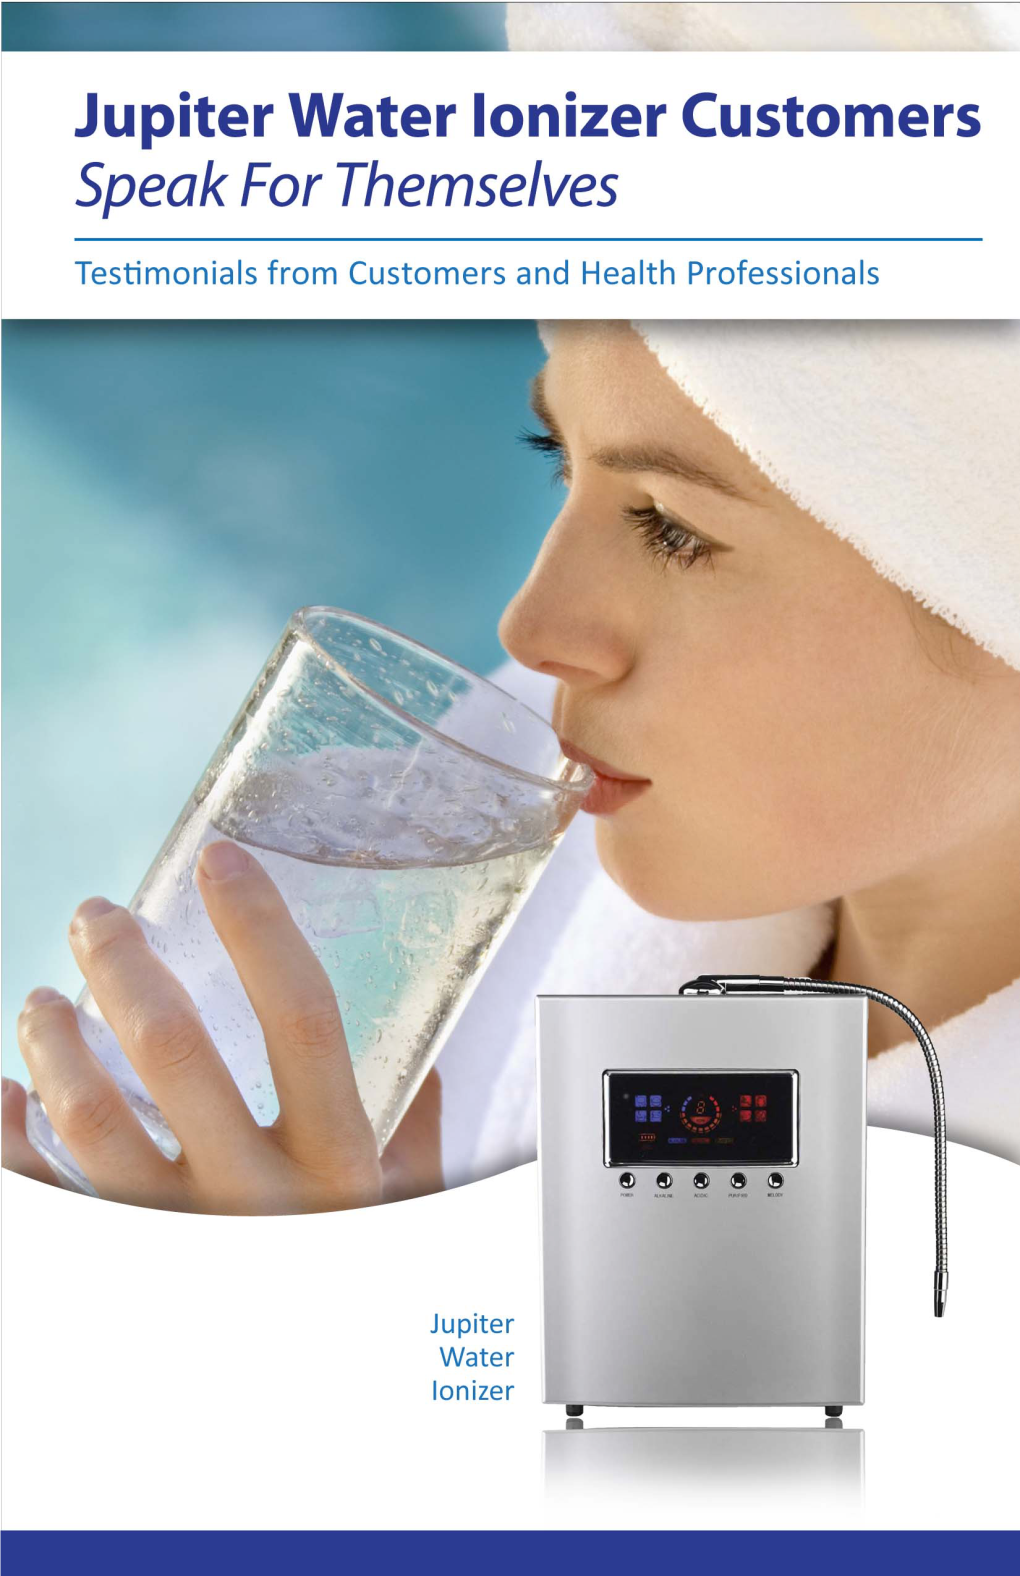 Jupiter Water Ionizer Customers Speak for Themselves Testimonials from Customers and Health Professionals